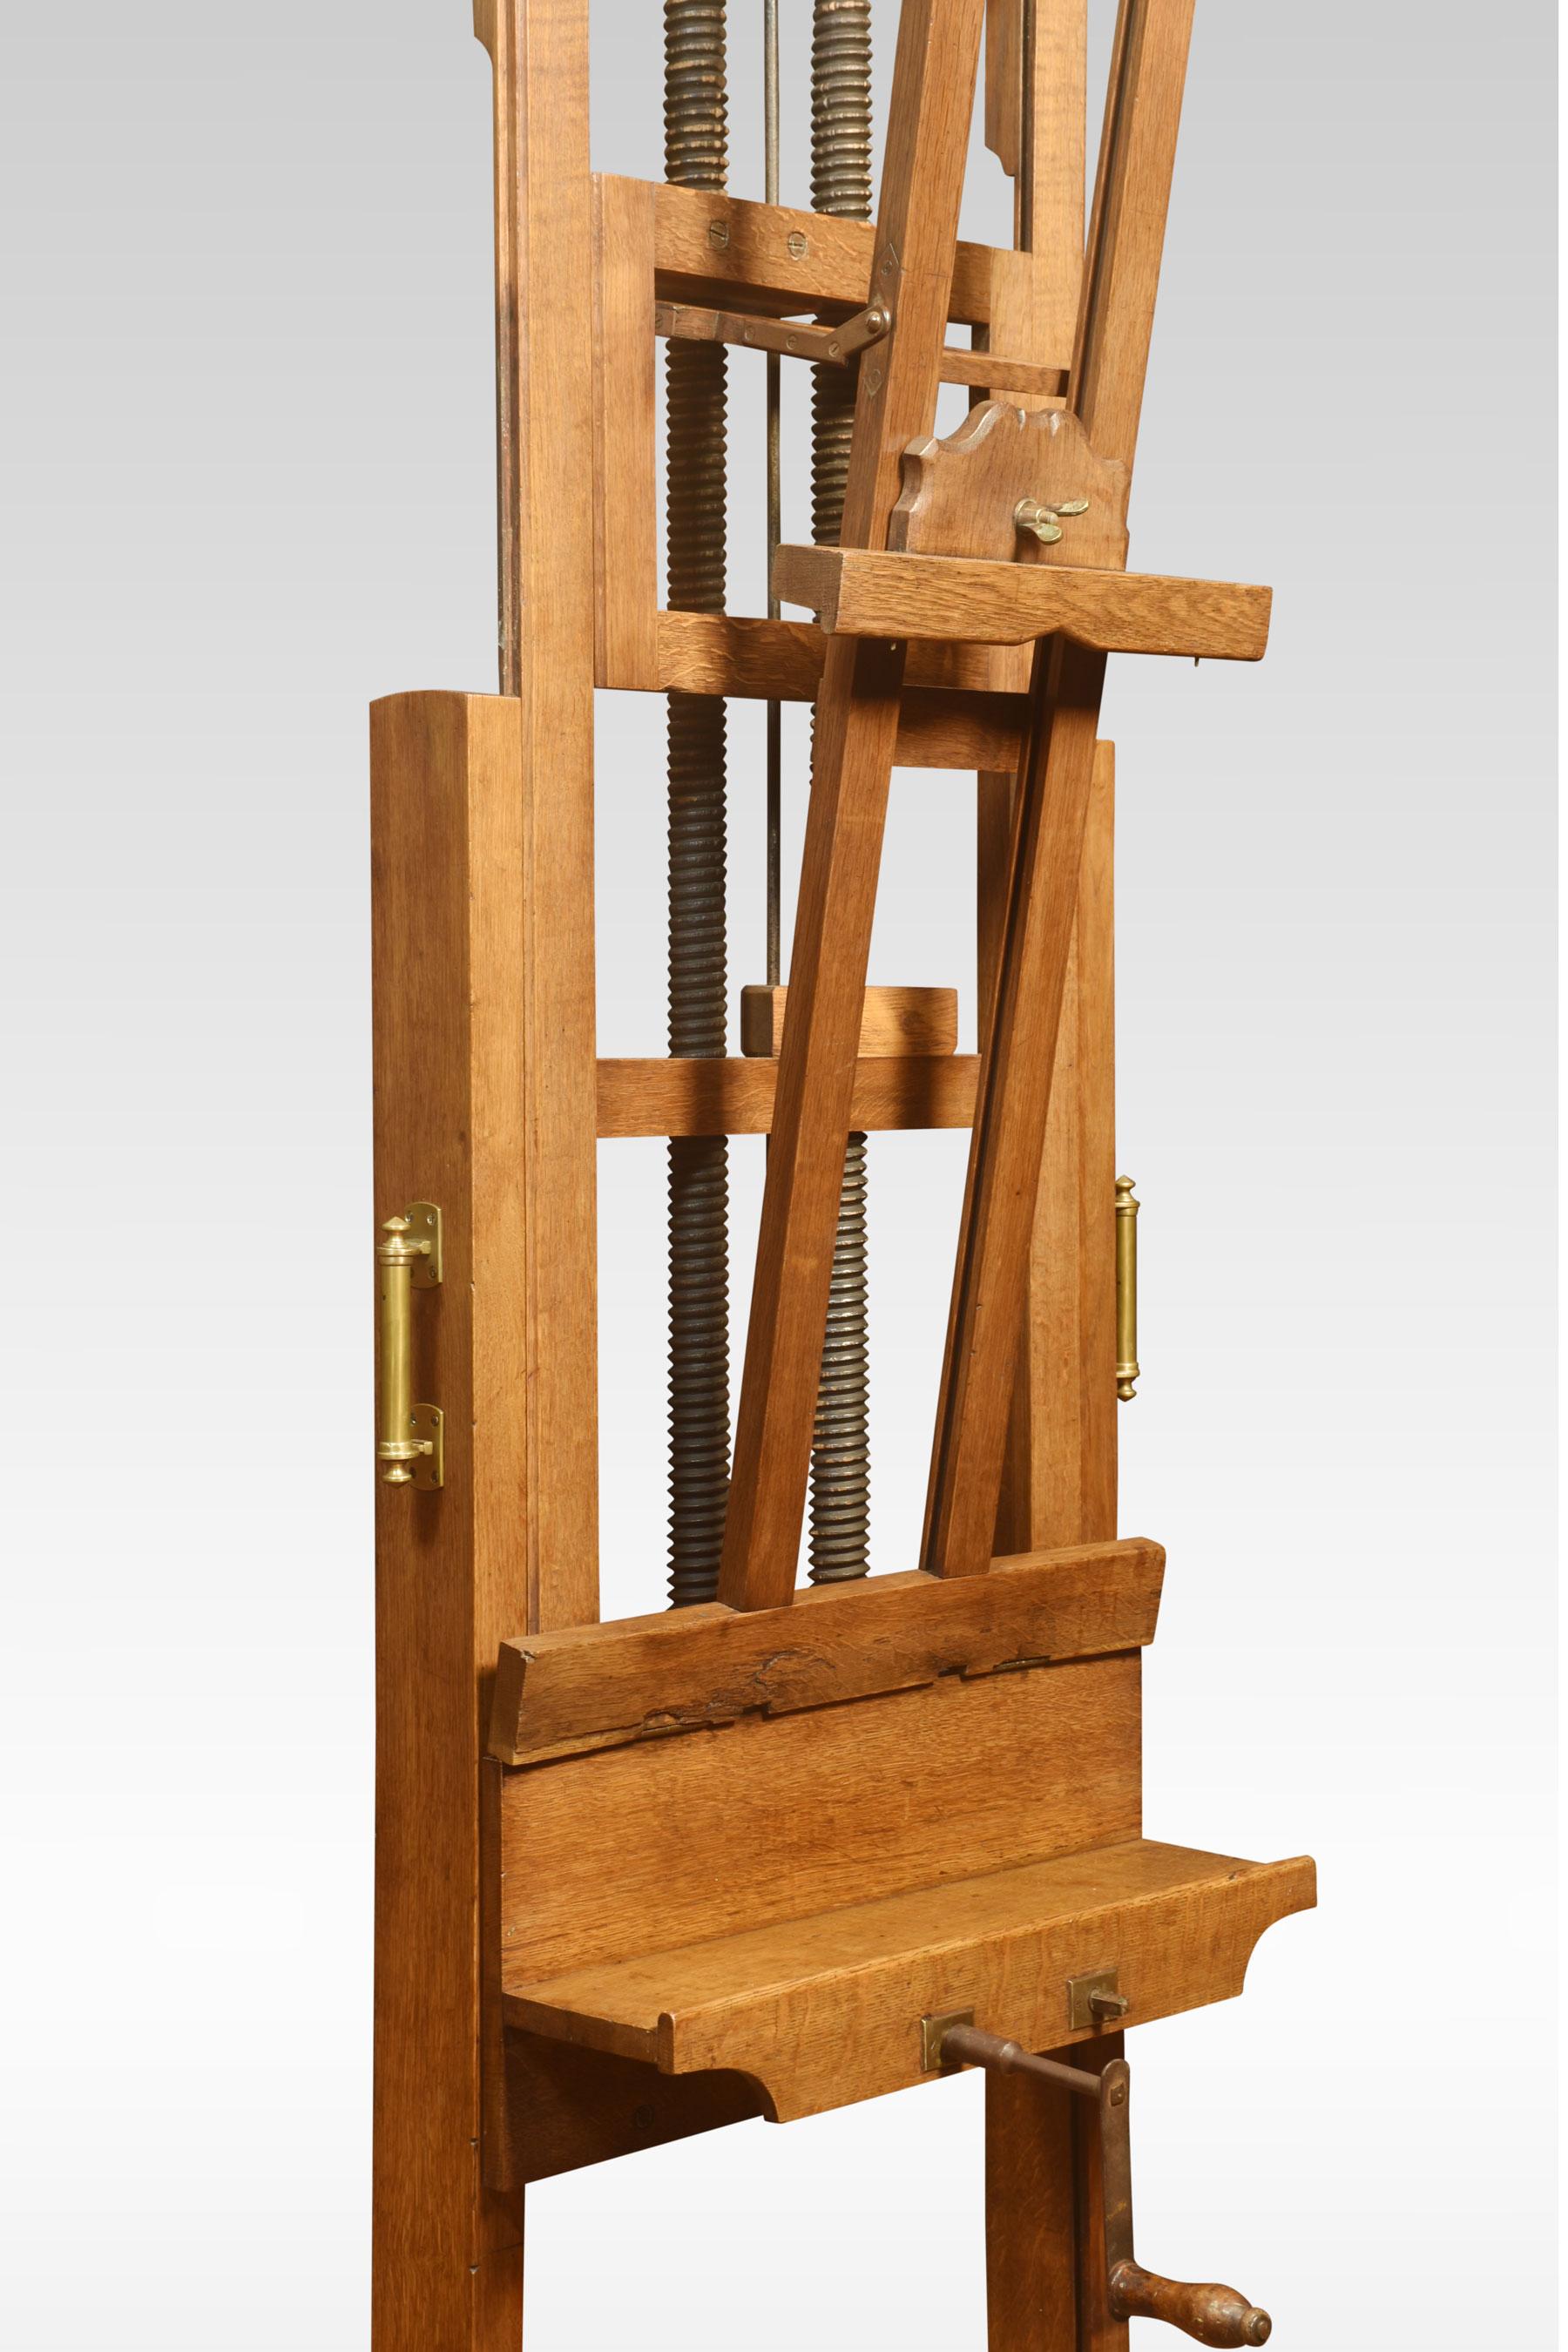 Oak Artist’s Fully Adjustable Studio Easel In Good Condition For Sale In Cheshire, GB